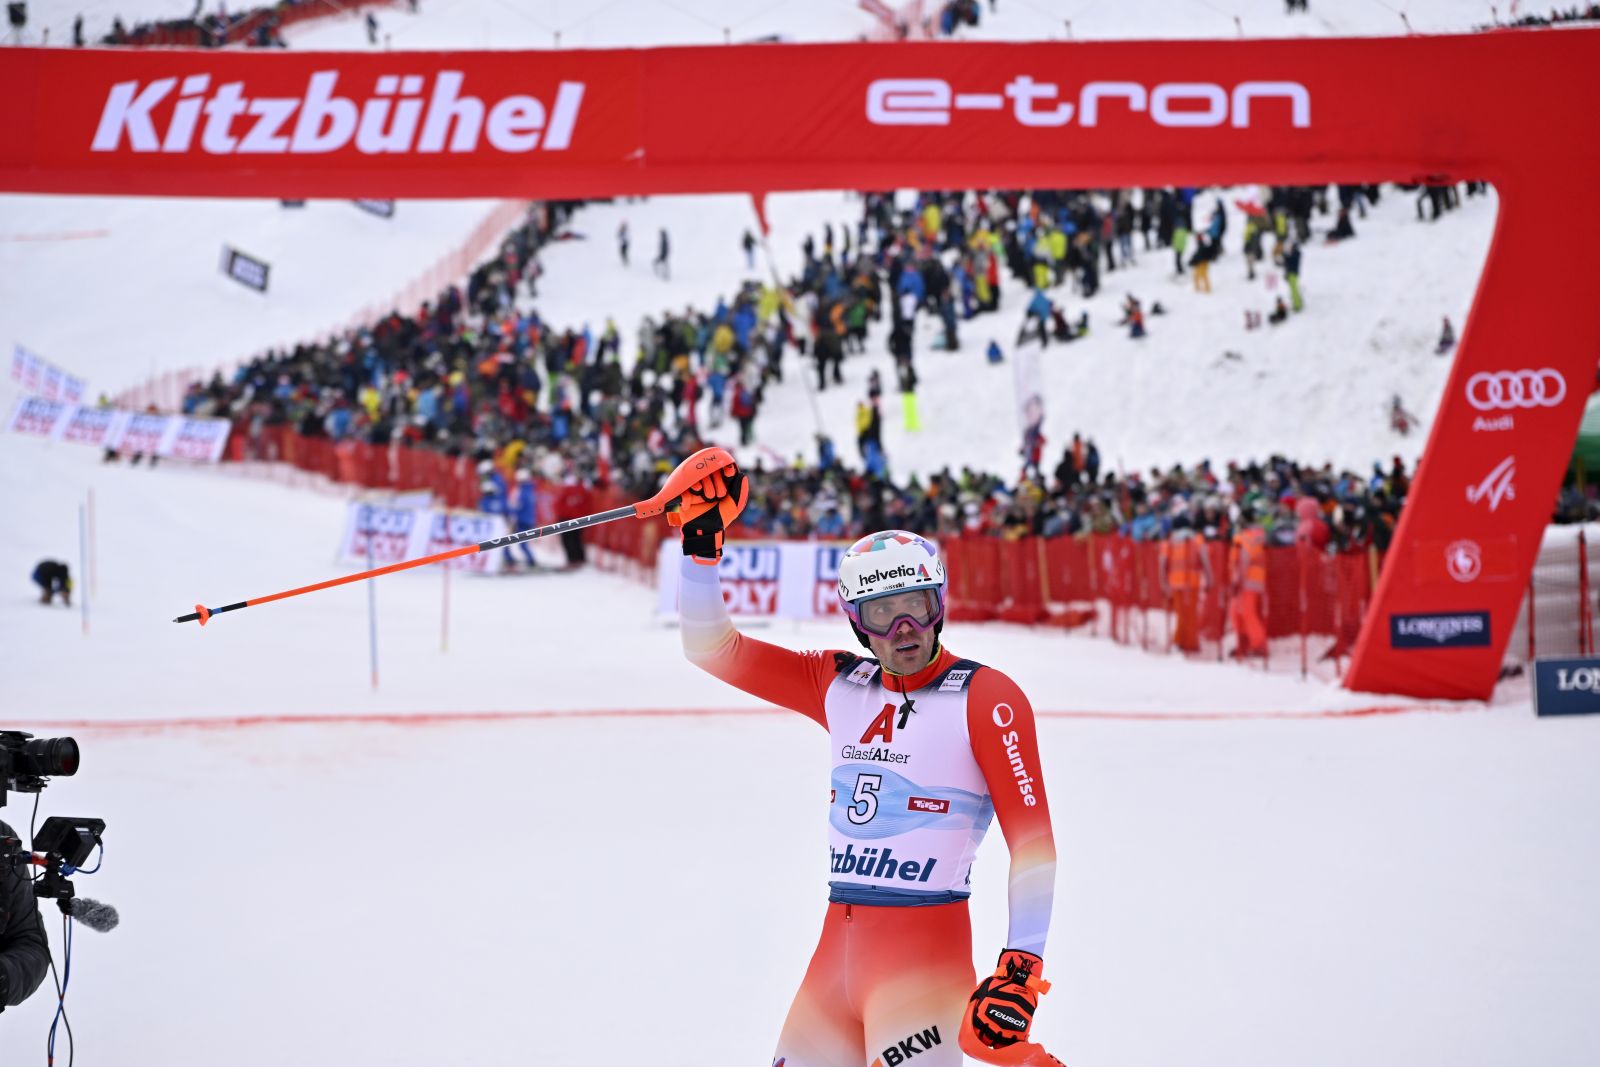 epa10422665 Daniel Yule of Switzerland reacts in the finish area during the second run of the men's slalom race at the FIS Alpine Skiing World Cup in Kitzbuehel, Austria, 22 January 2023.  EPA/JEAN-CHRISTOPHE BOTT